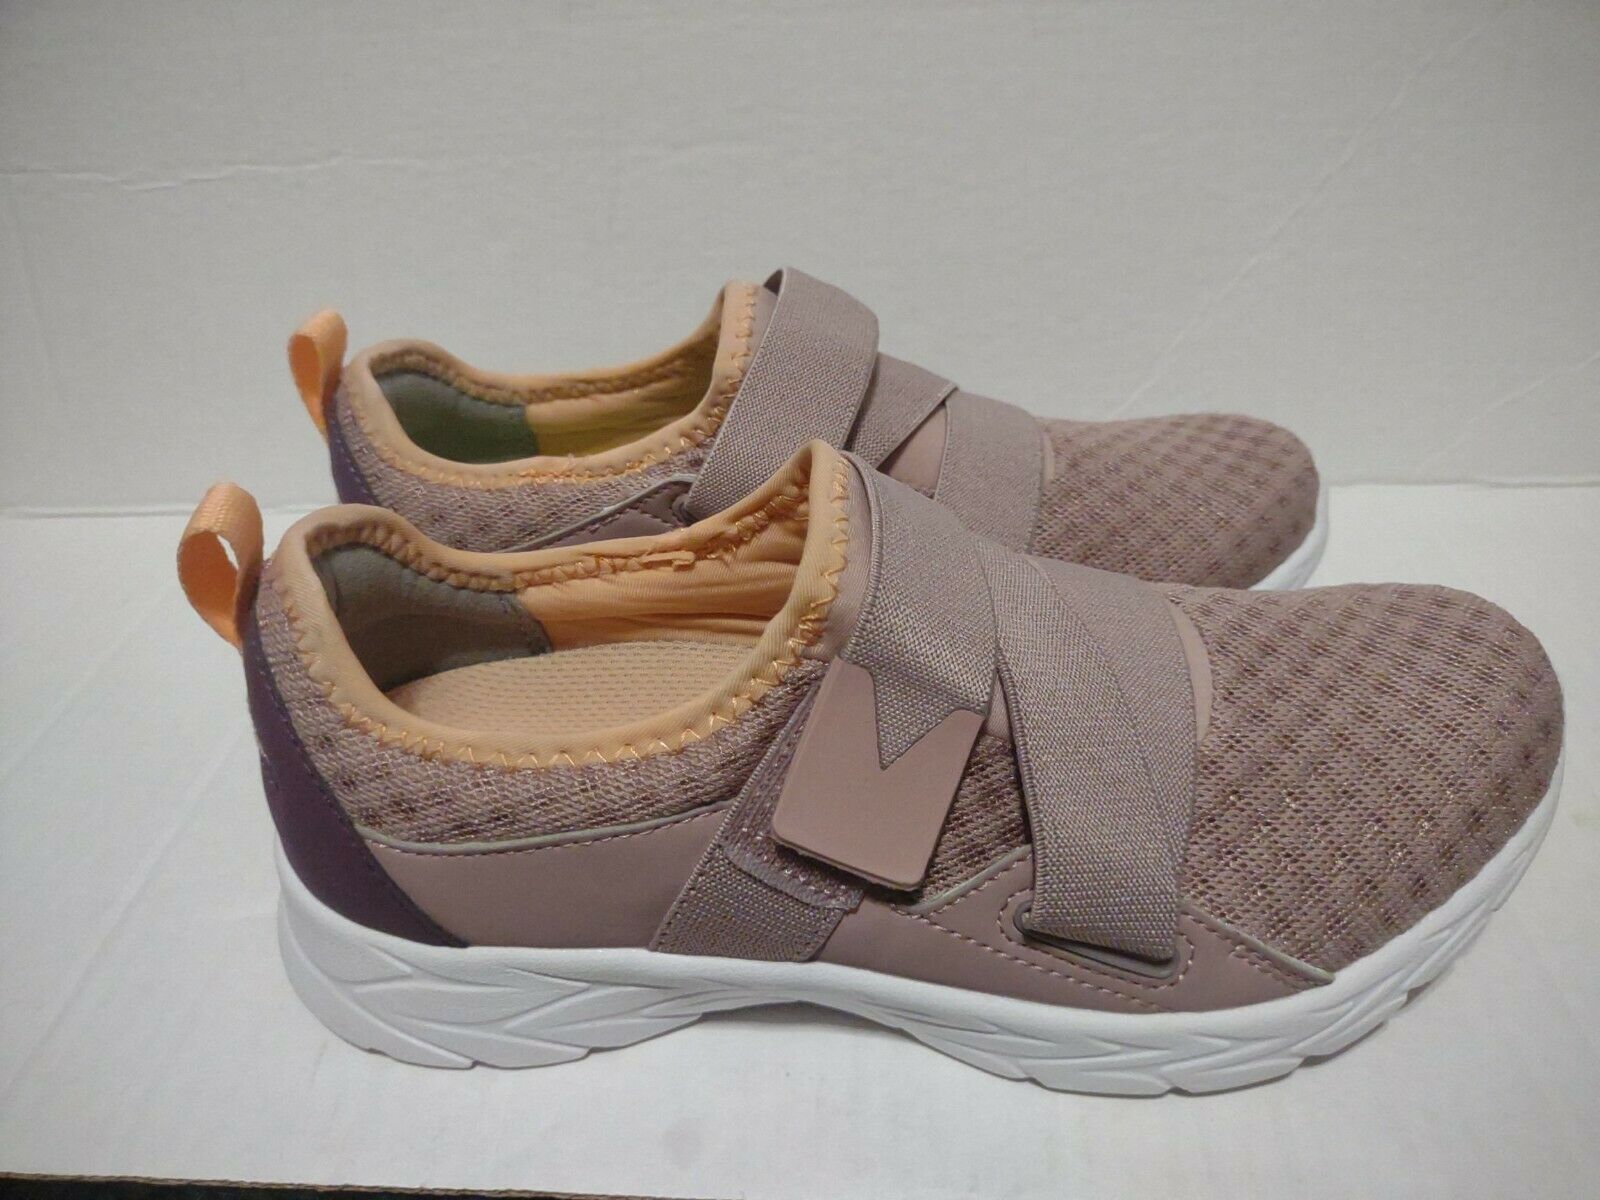 **Vionic Aimmy 11 Casual Comfort Slip On Shoes, Women's Size 6 BLUSH